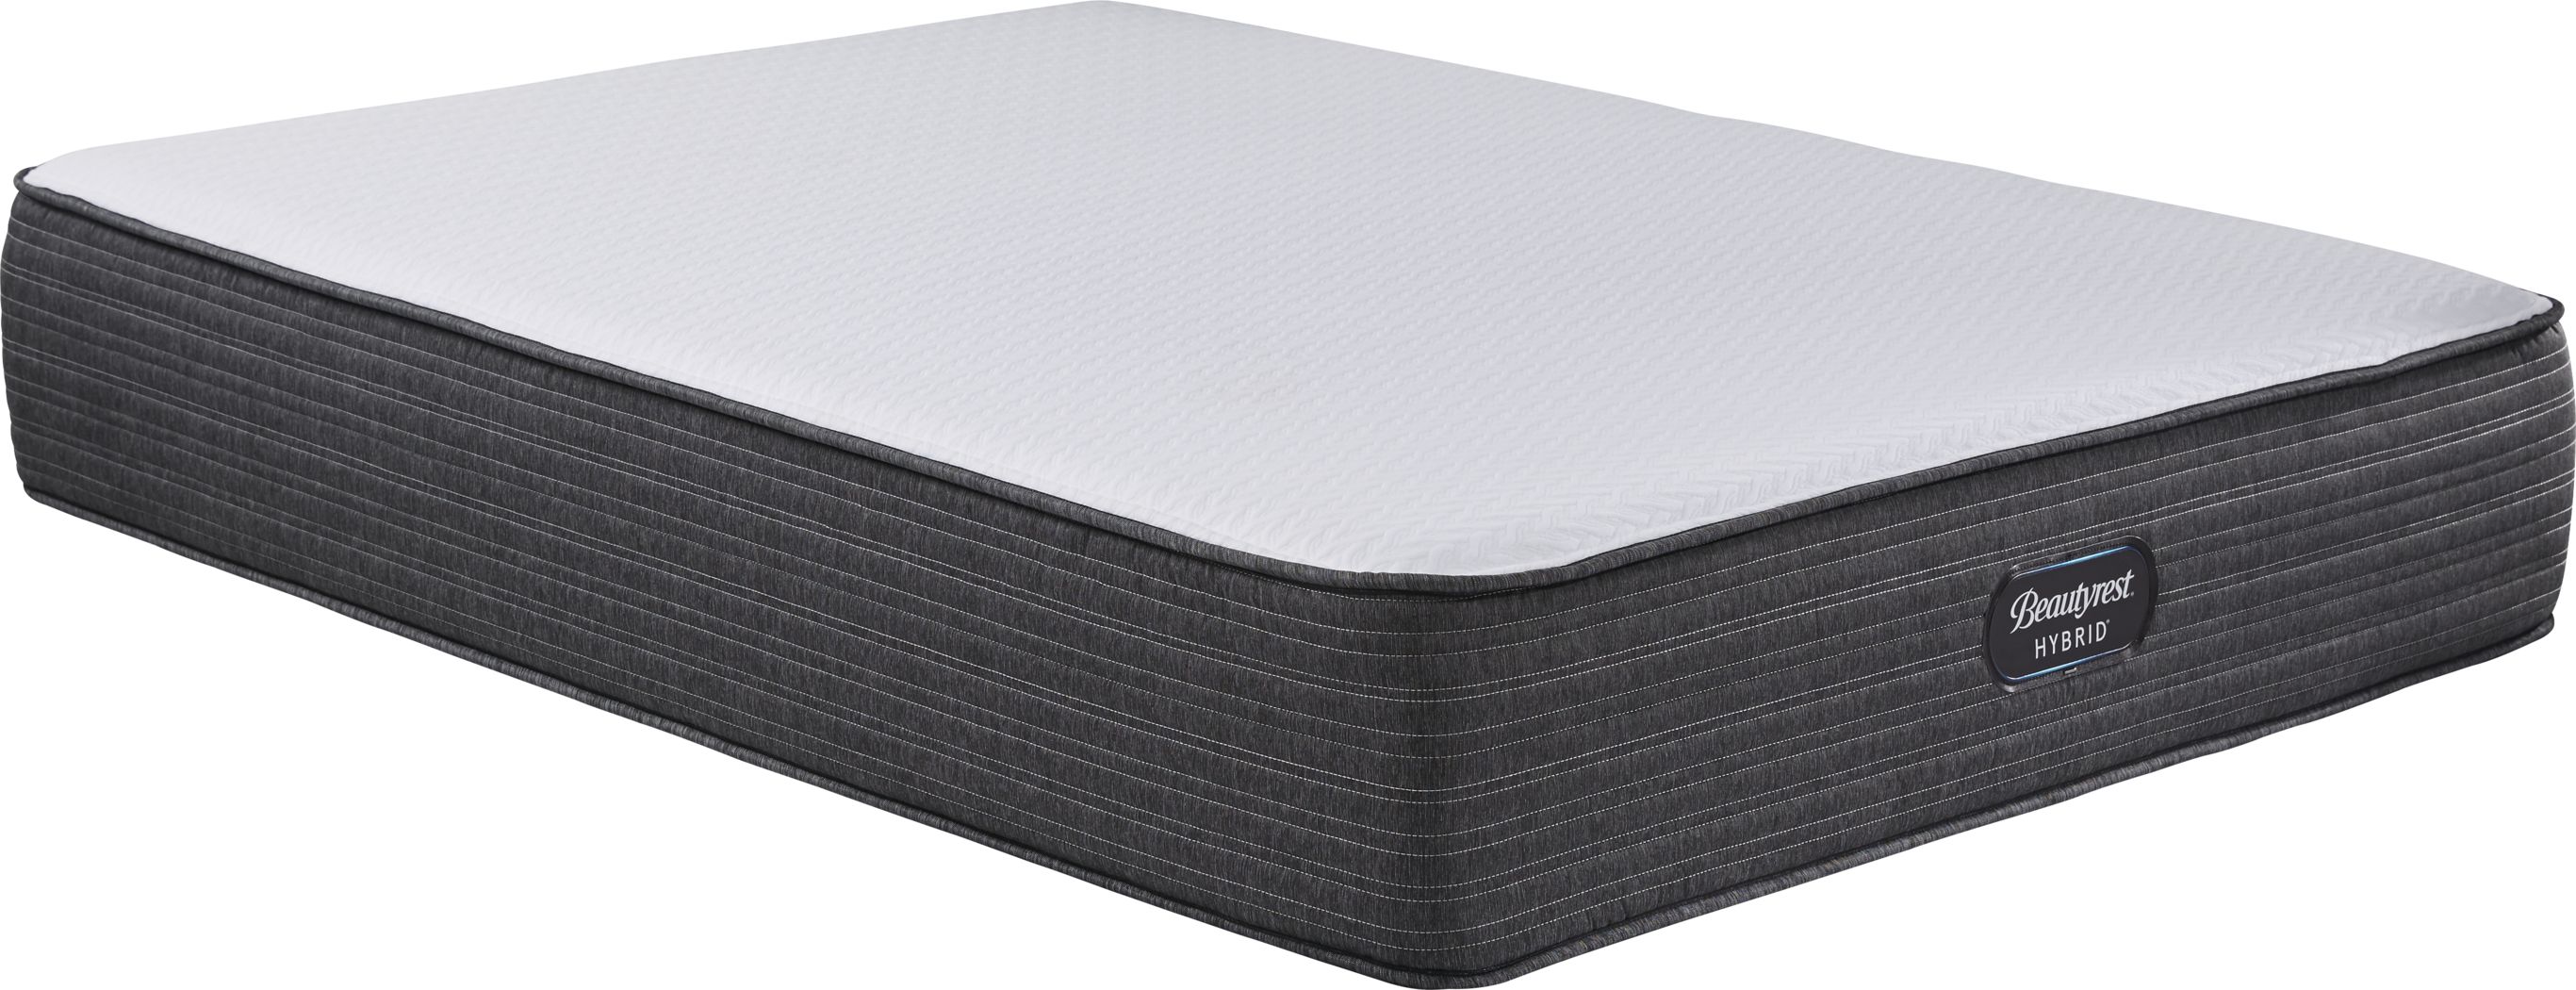 king mattress seely ultimate